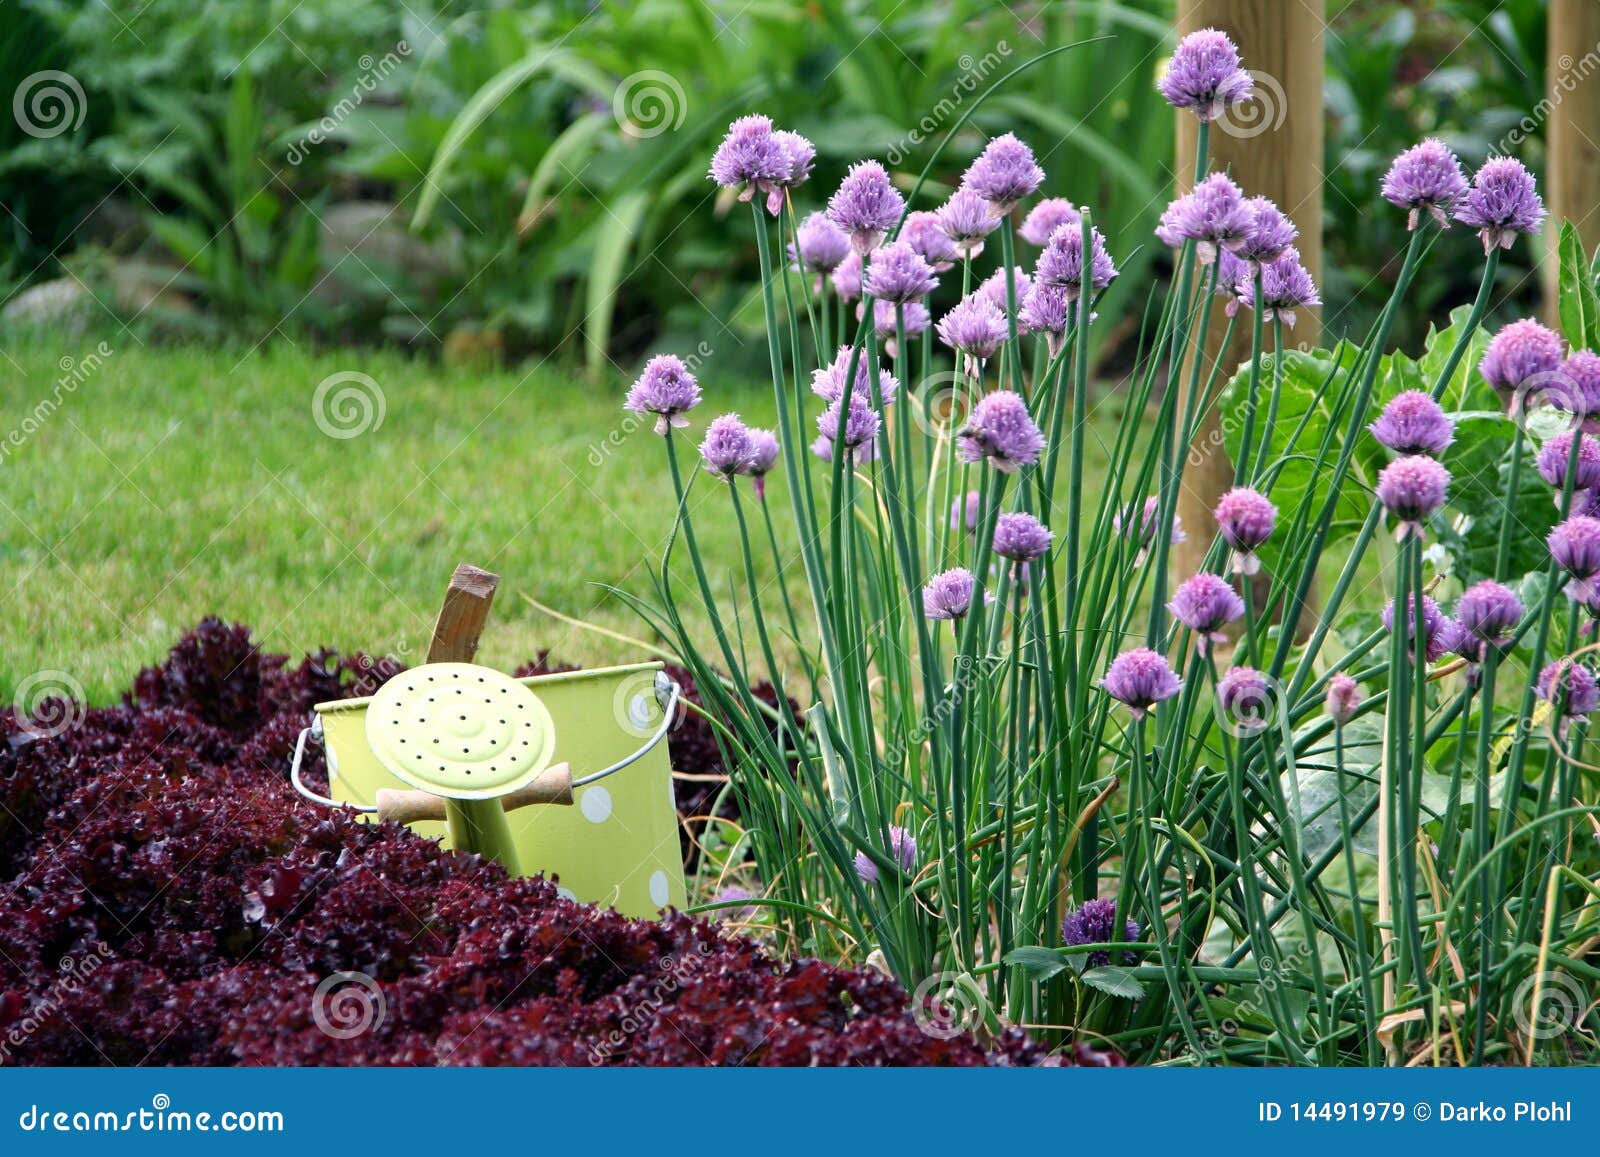 chive and gardening